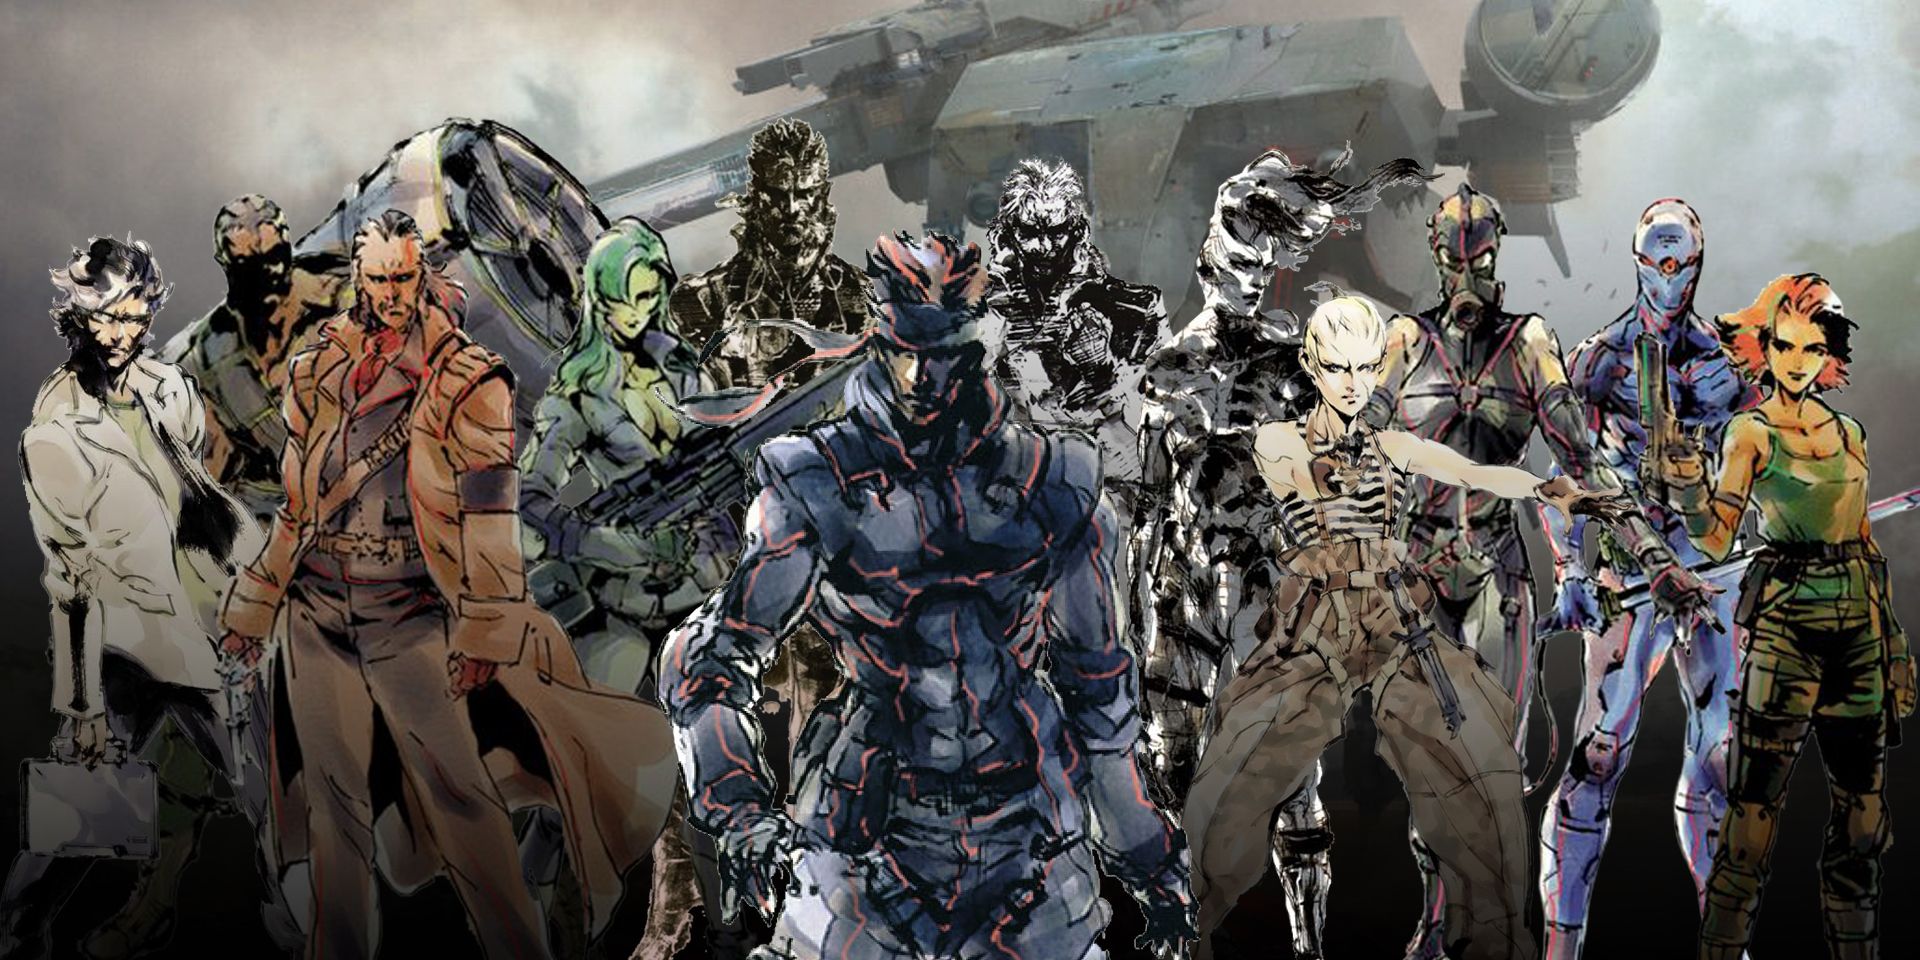 A collection of characters from Metal Gear's history.